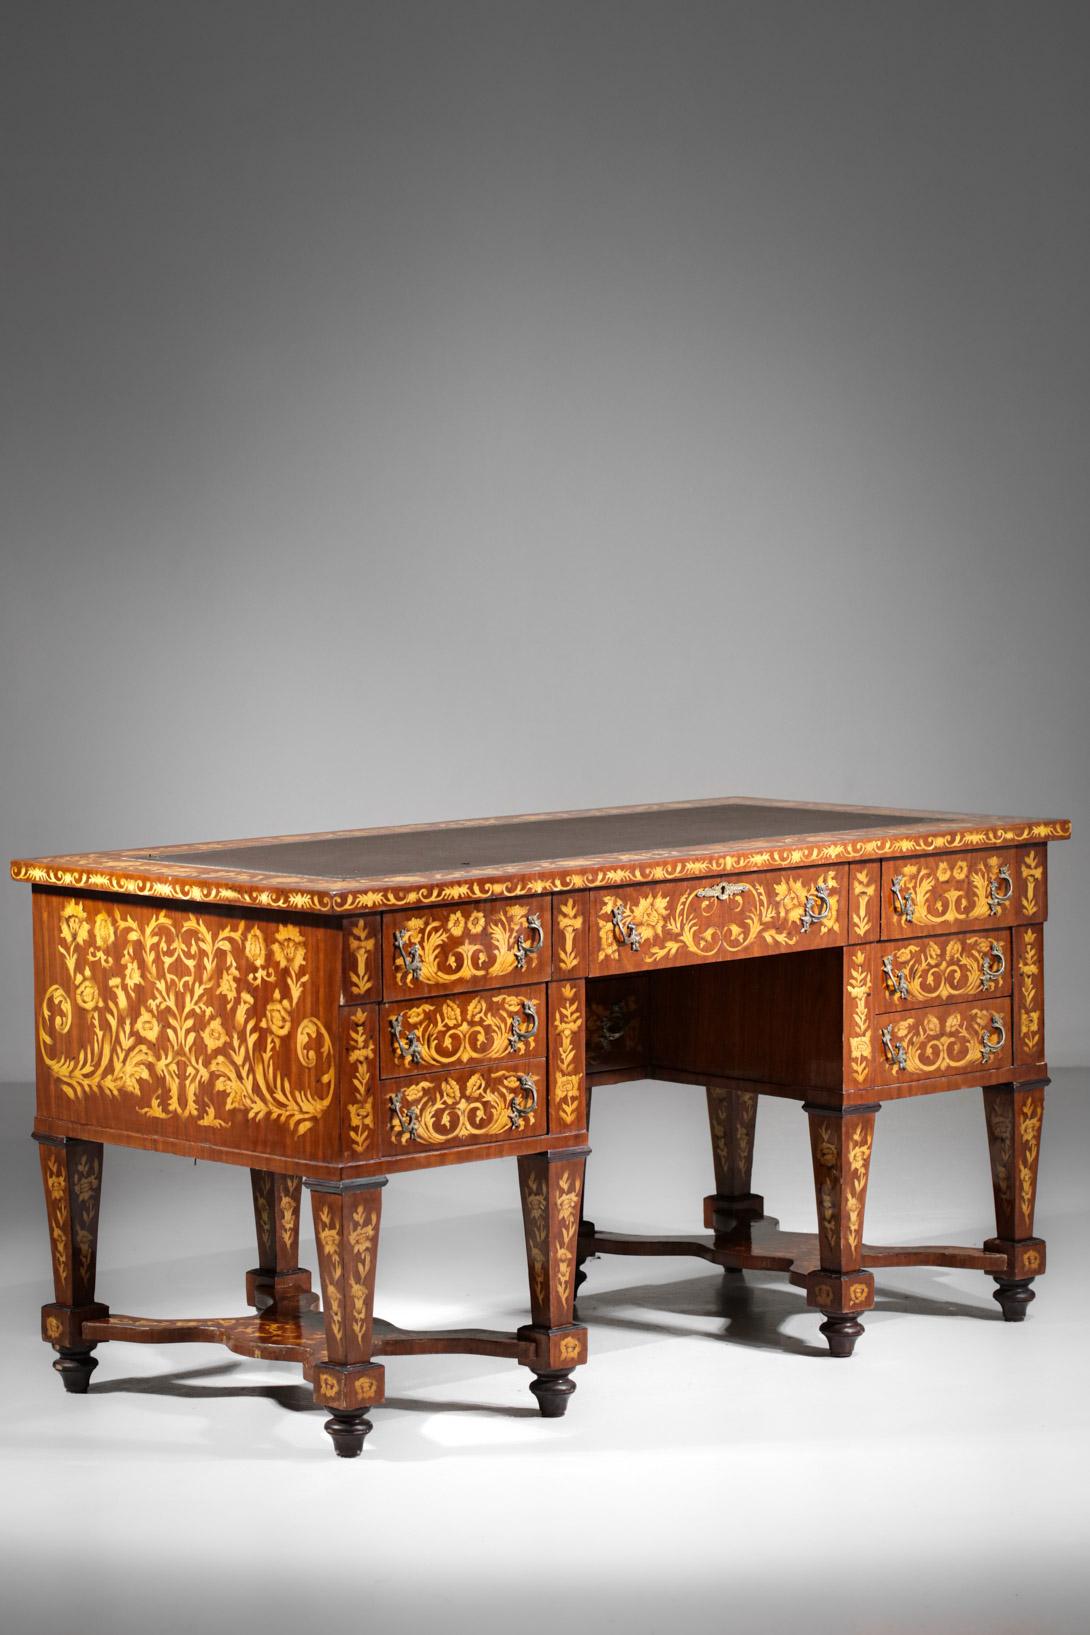 Louis XIV Mazarin Style Desk in Solid Wood and Floral Marquetry, F419